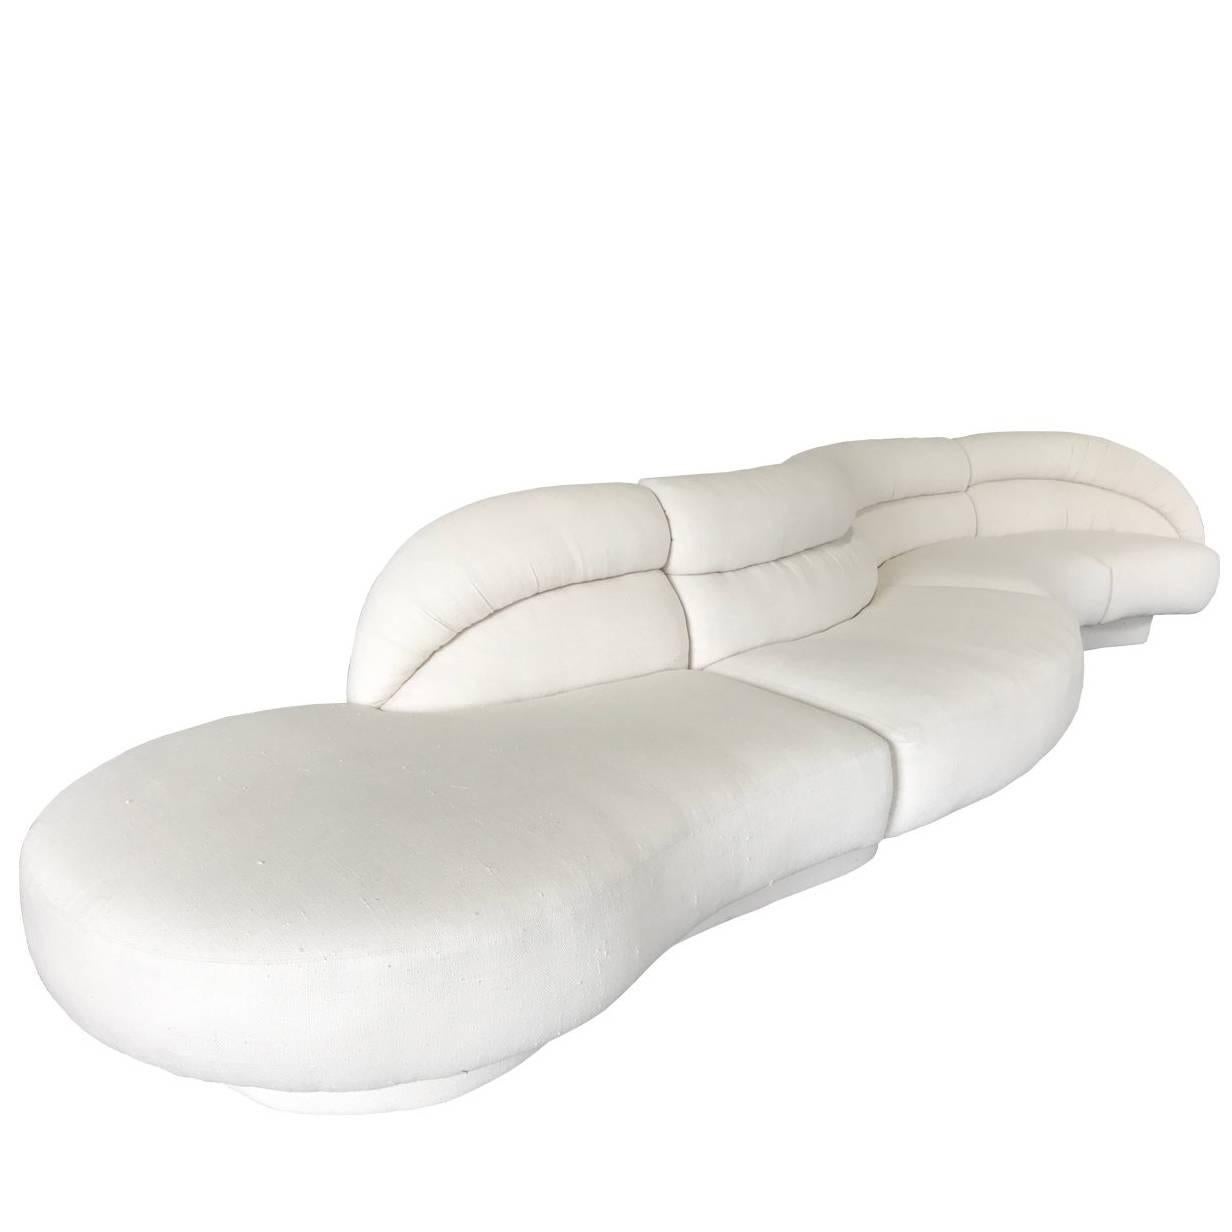 Monumental Serpentine Sofa by Directional